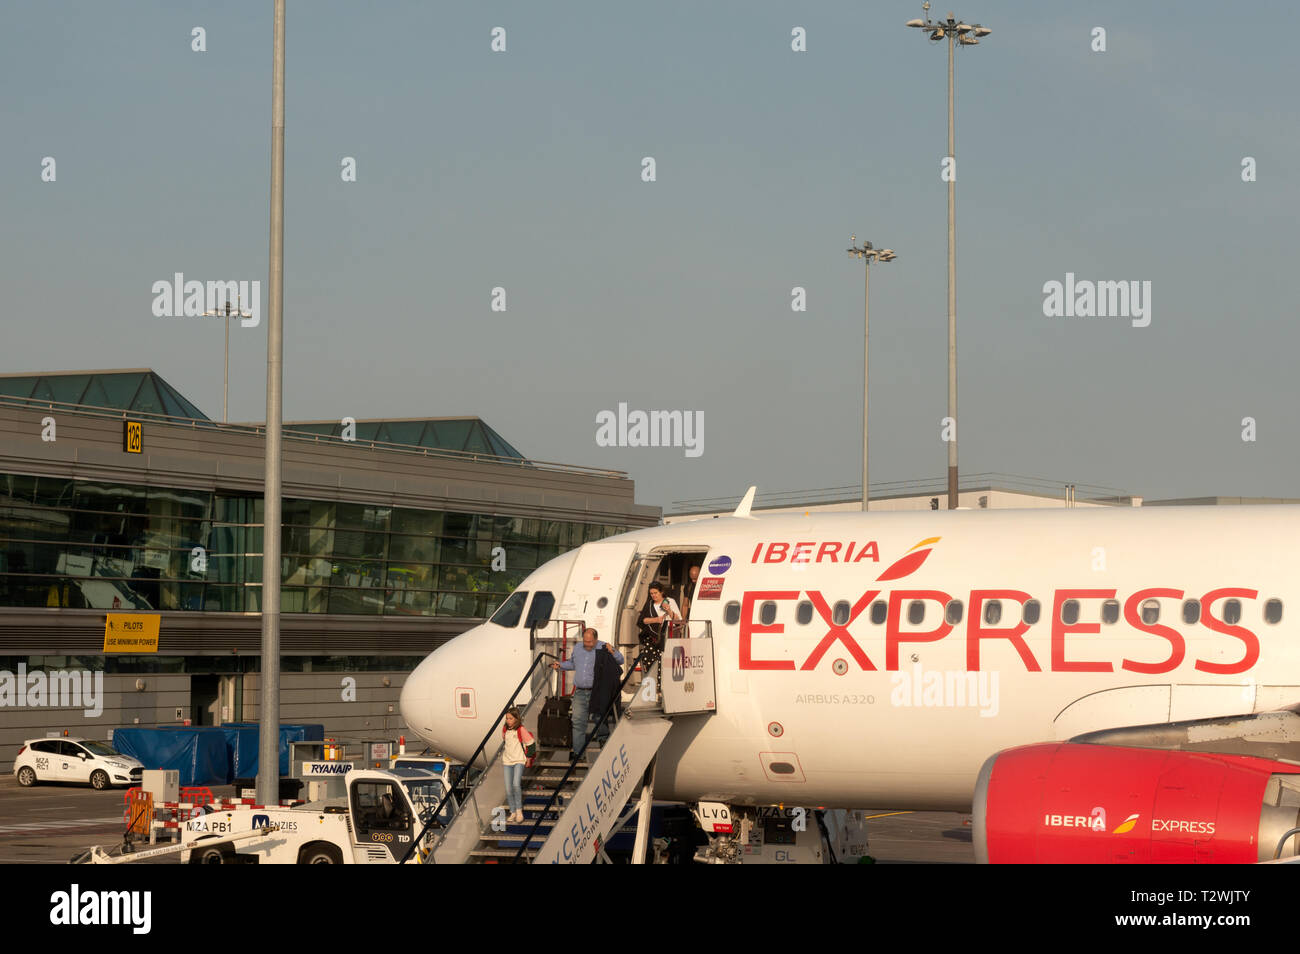 Dublin Airport Iberia Express Airbus A320 jet plane and passengers Stock Photo